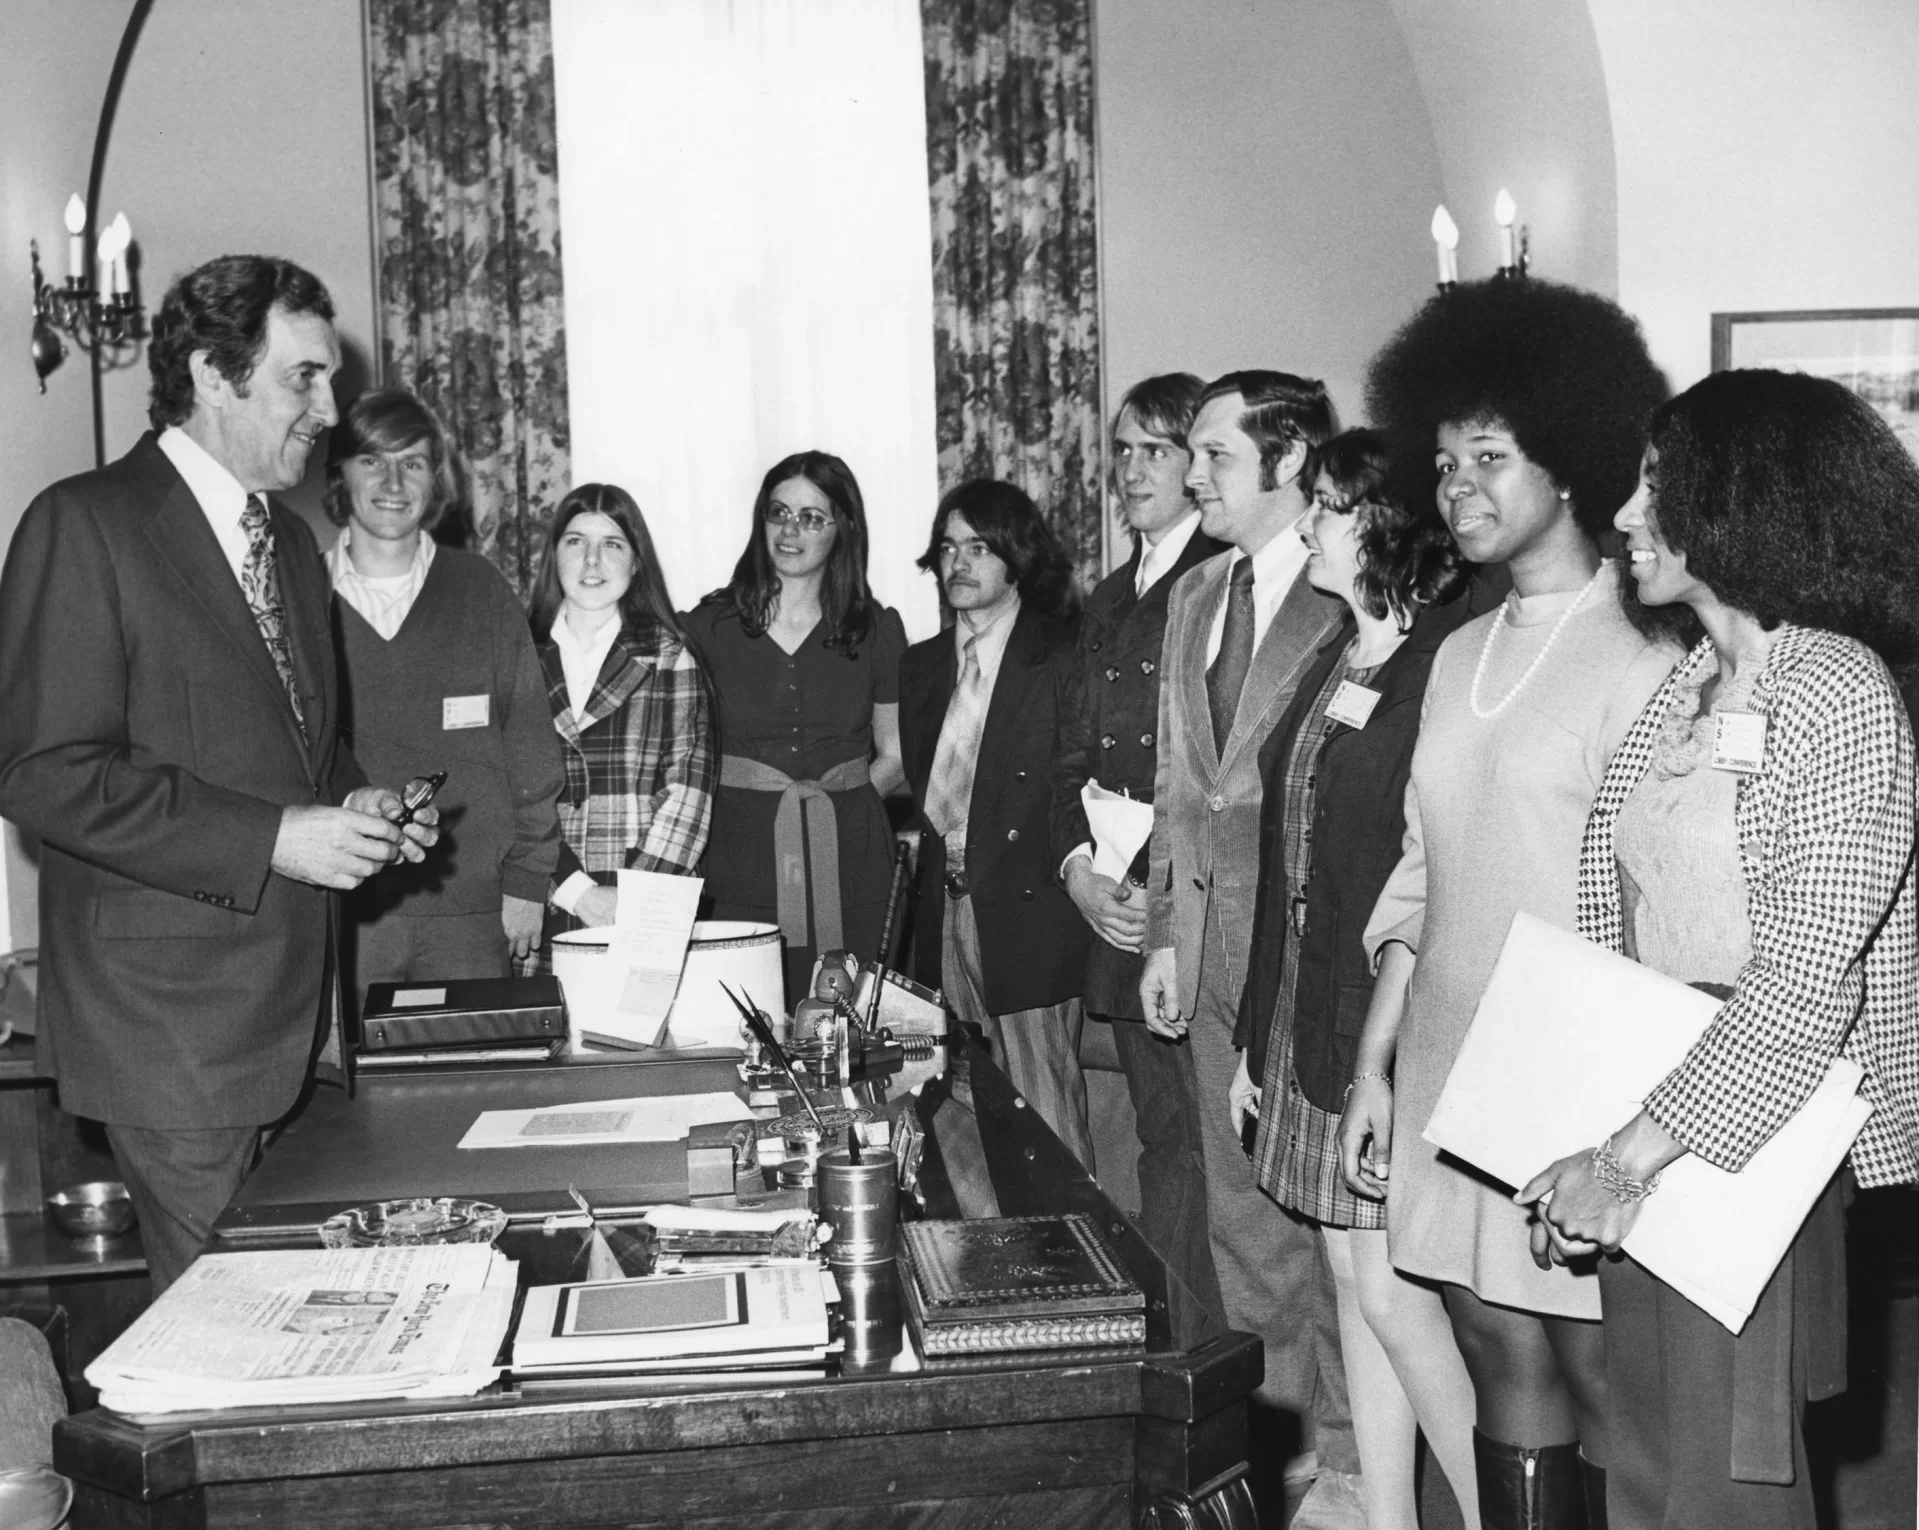 Behind his desk, Sen. Edmund Muskie '36 stands to meet visitors in his Senate office on March 7, 1973. The group may be from the National Student Lobby. (Muskie Archives and Special Collections Library)